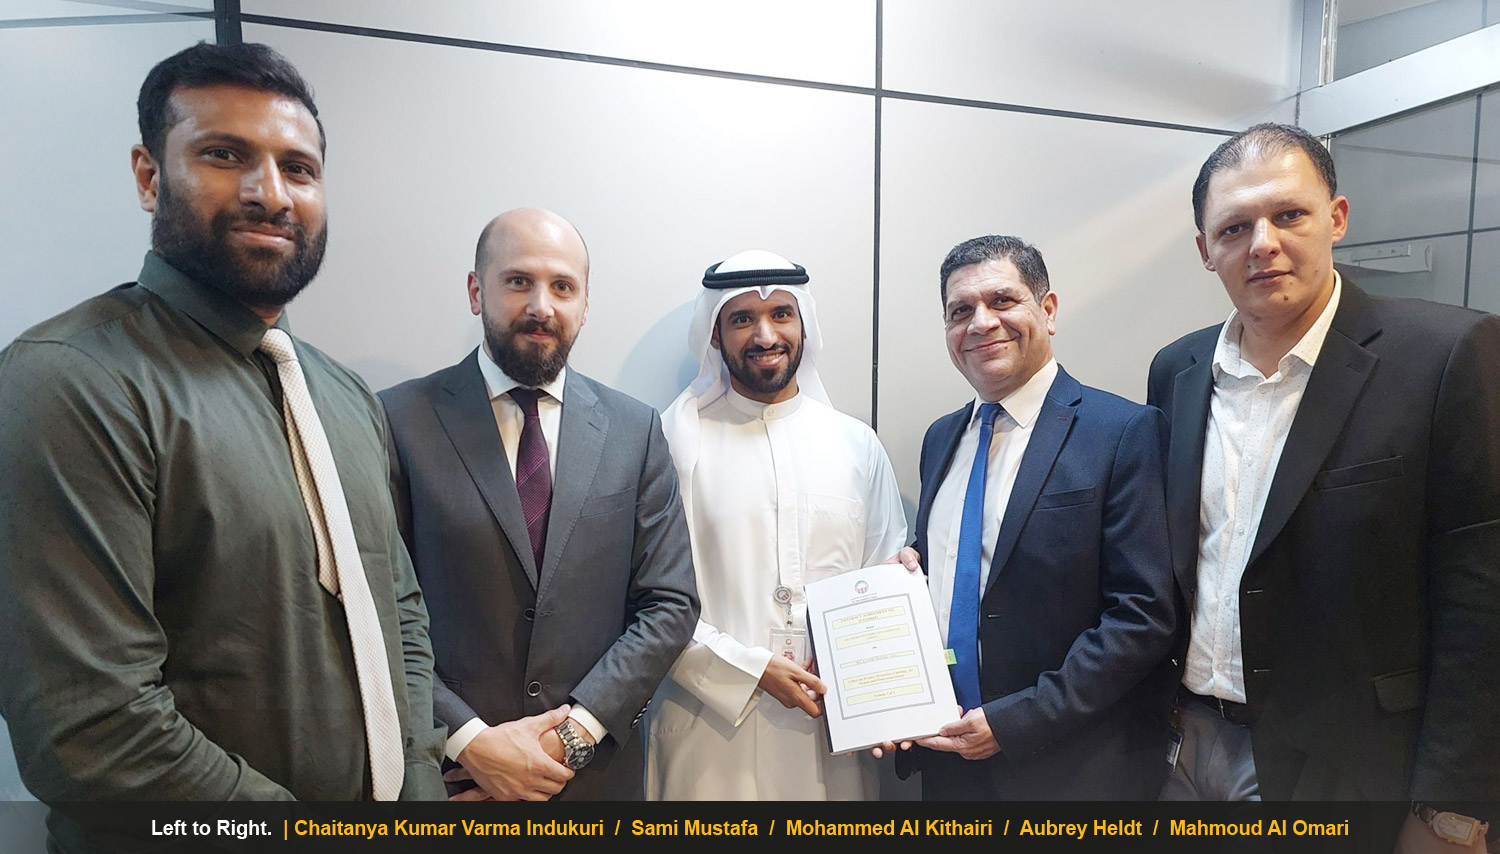 Kanoo Travel Abu Dhabi and ADDC Signs Travel Services Agreement
